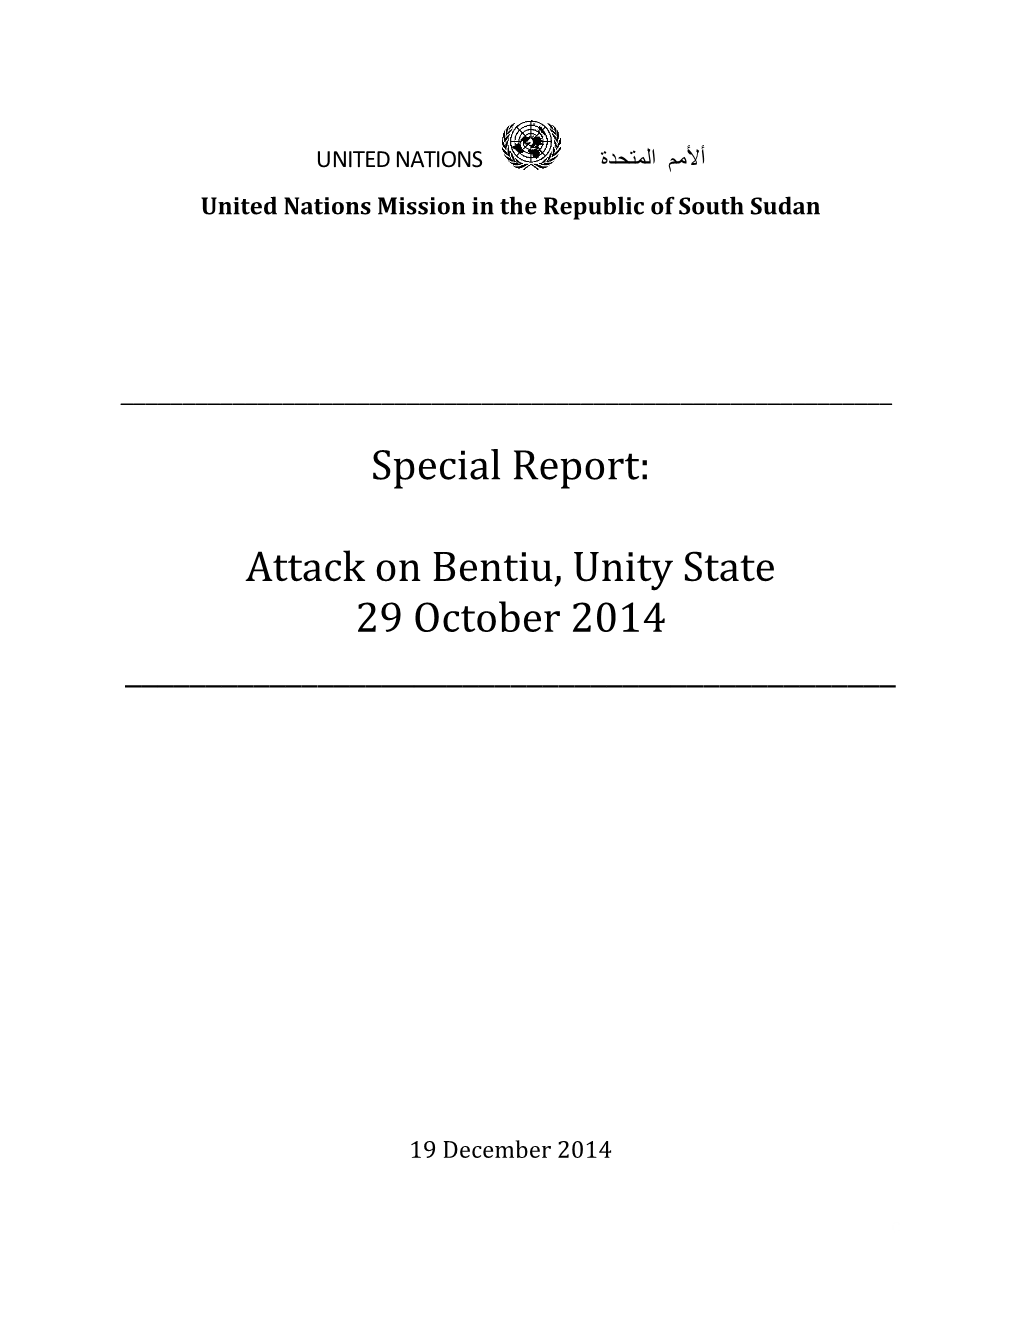 Special Report: Attack on Bentiu, Unity State 29 October 2014